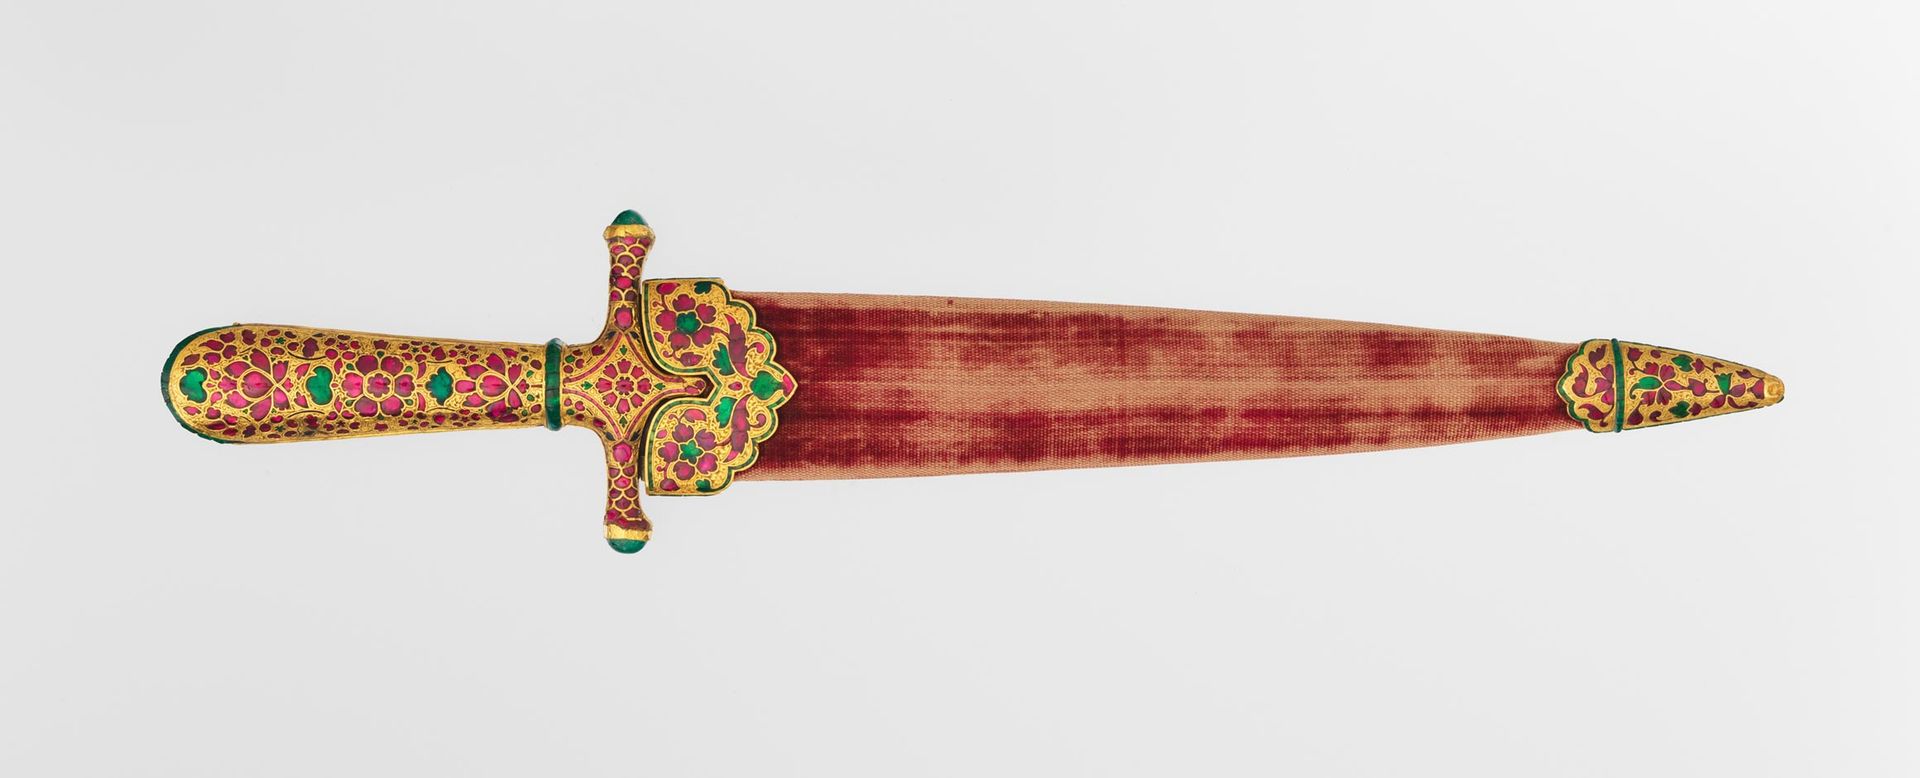 Dagger covered with red sheath and gold hilt, containing inlaid rubies and emeralds, designed in floral forms